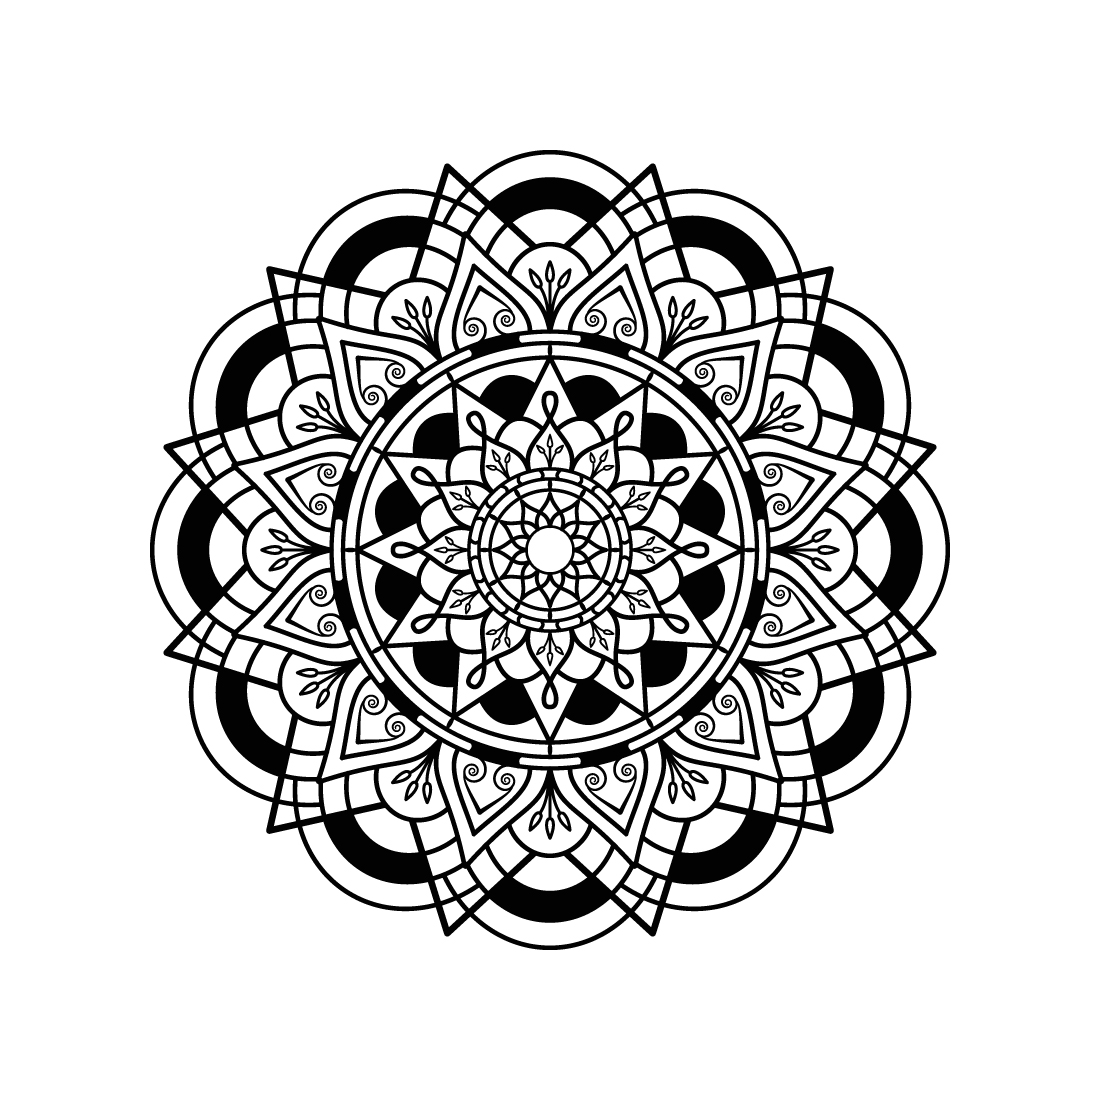 Bundle of 10 Mindfulness Mandalas for Paper Cutting or Coloring Books preview image.